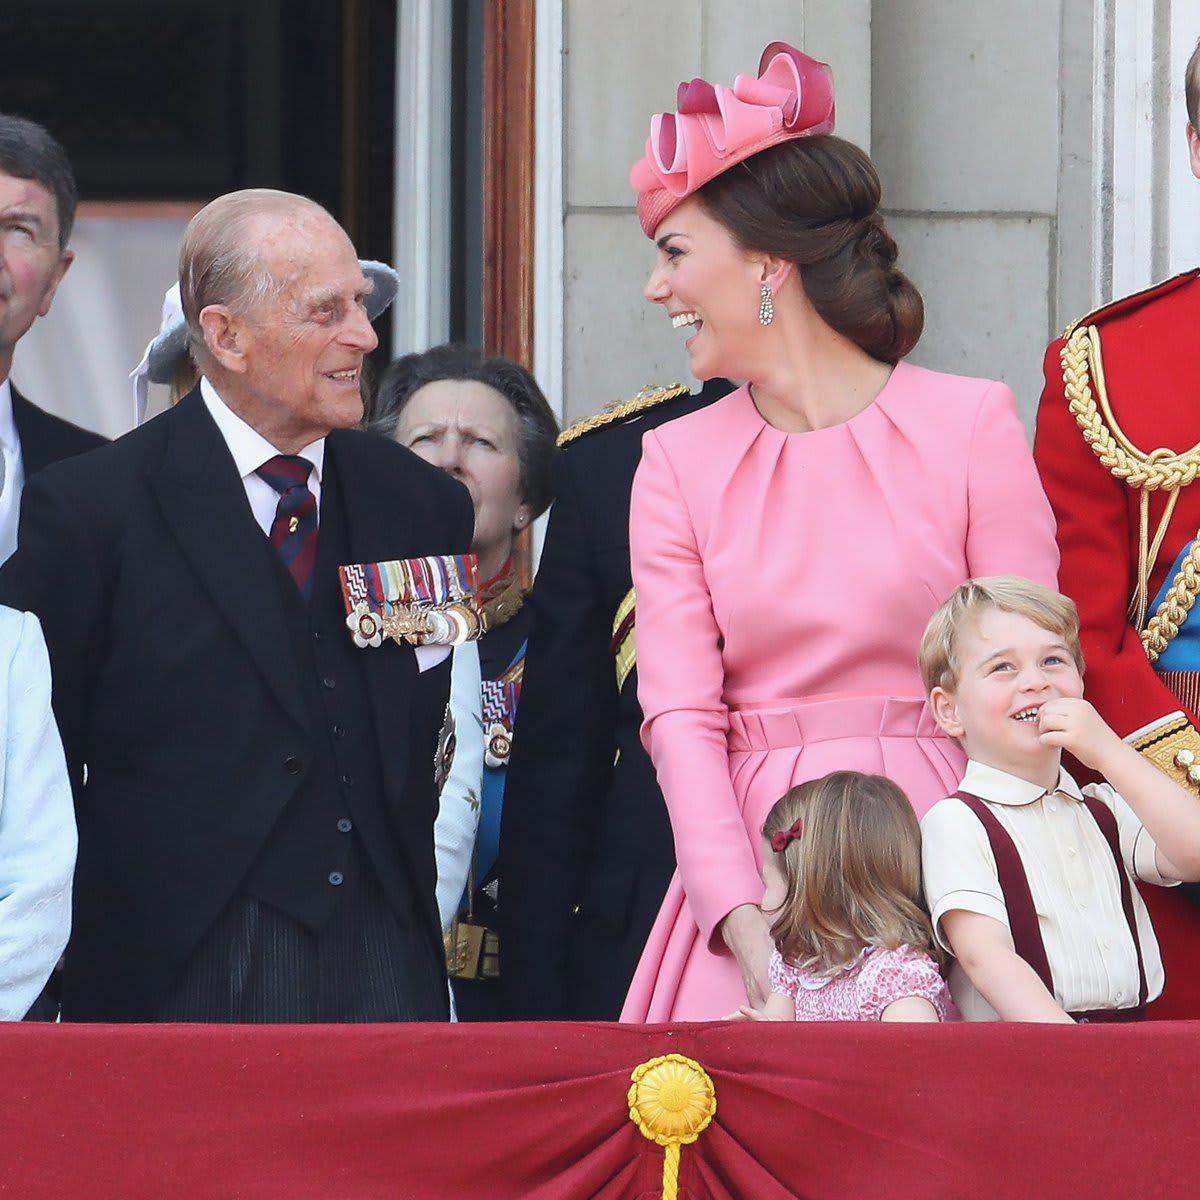 Must have been something he said! Kate Middleton laughed while chatting with her grandfather-in-law during Troop the Colour in 2017.